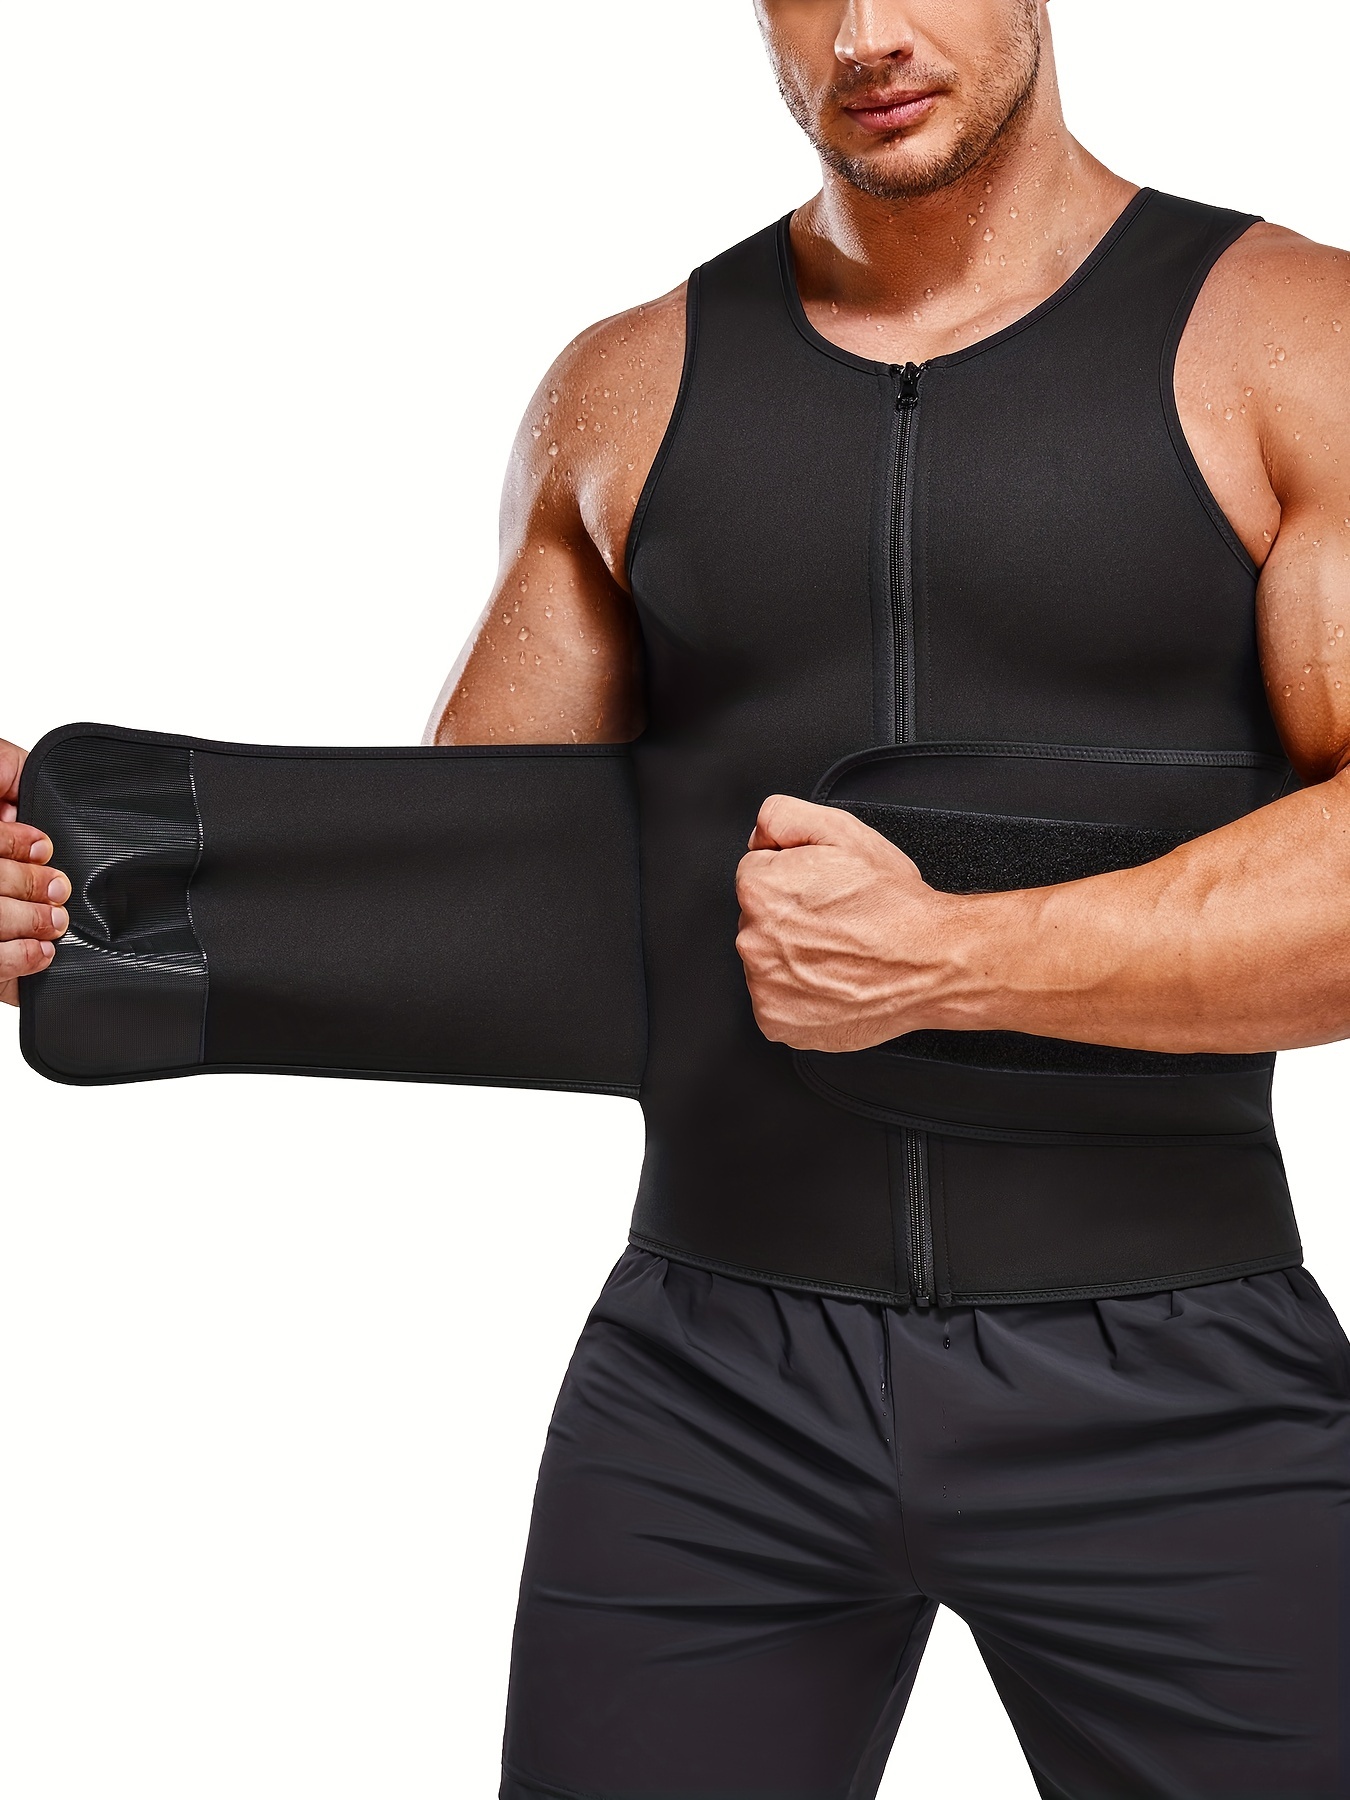 Men's Outdoor Sports Tight-fitting Sweat Sauna Vest, Waist Trainer Body  Shaper Back Support Vest Suitable For Exercise Fitness Gym